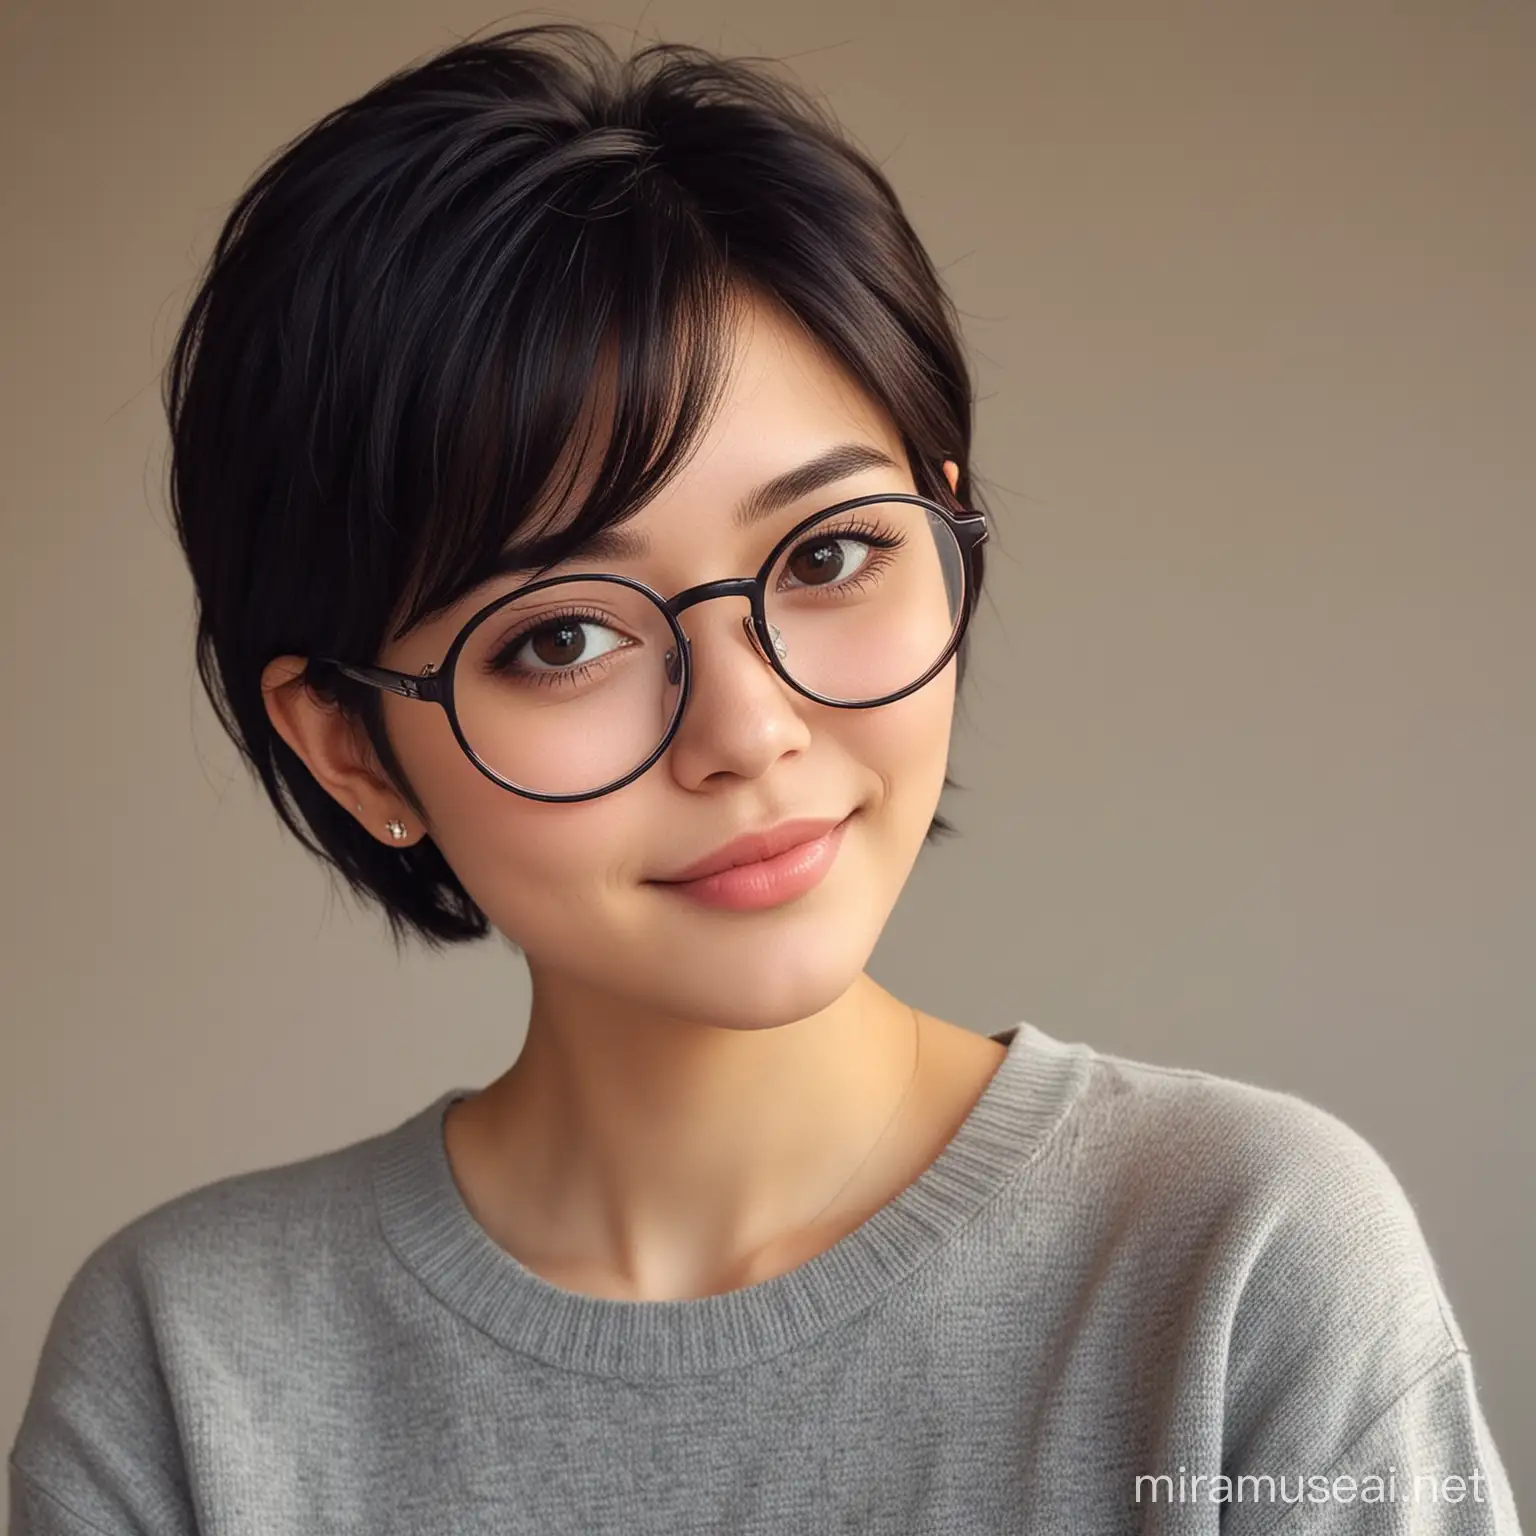 Adorable Woman with Glasses in Oversized Attire and Kind Expression